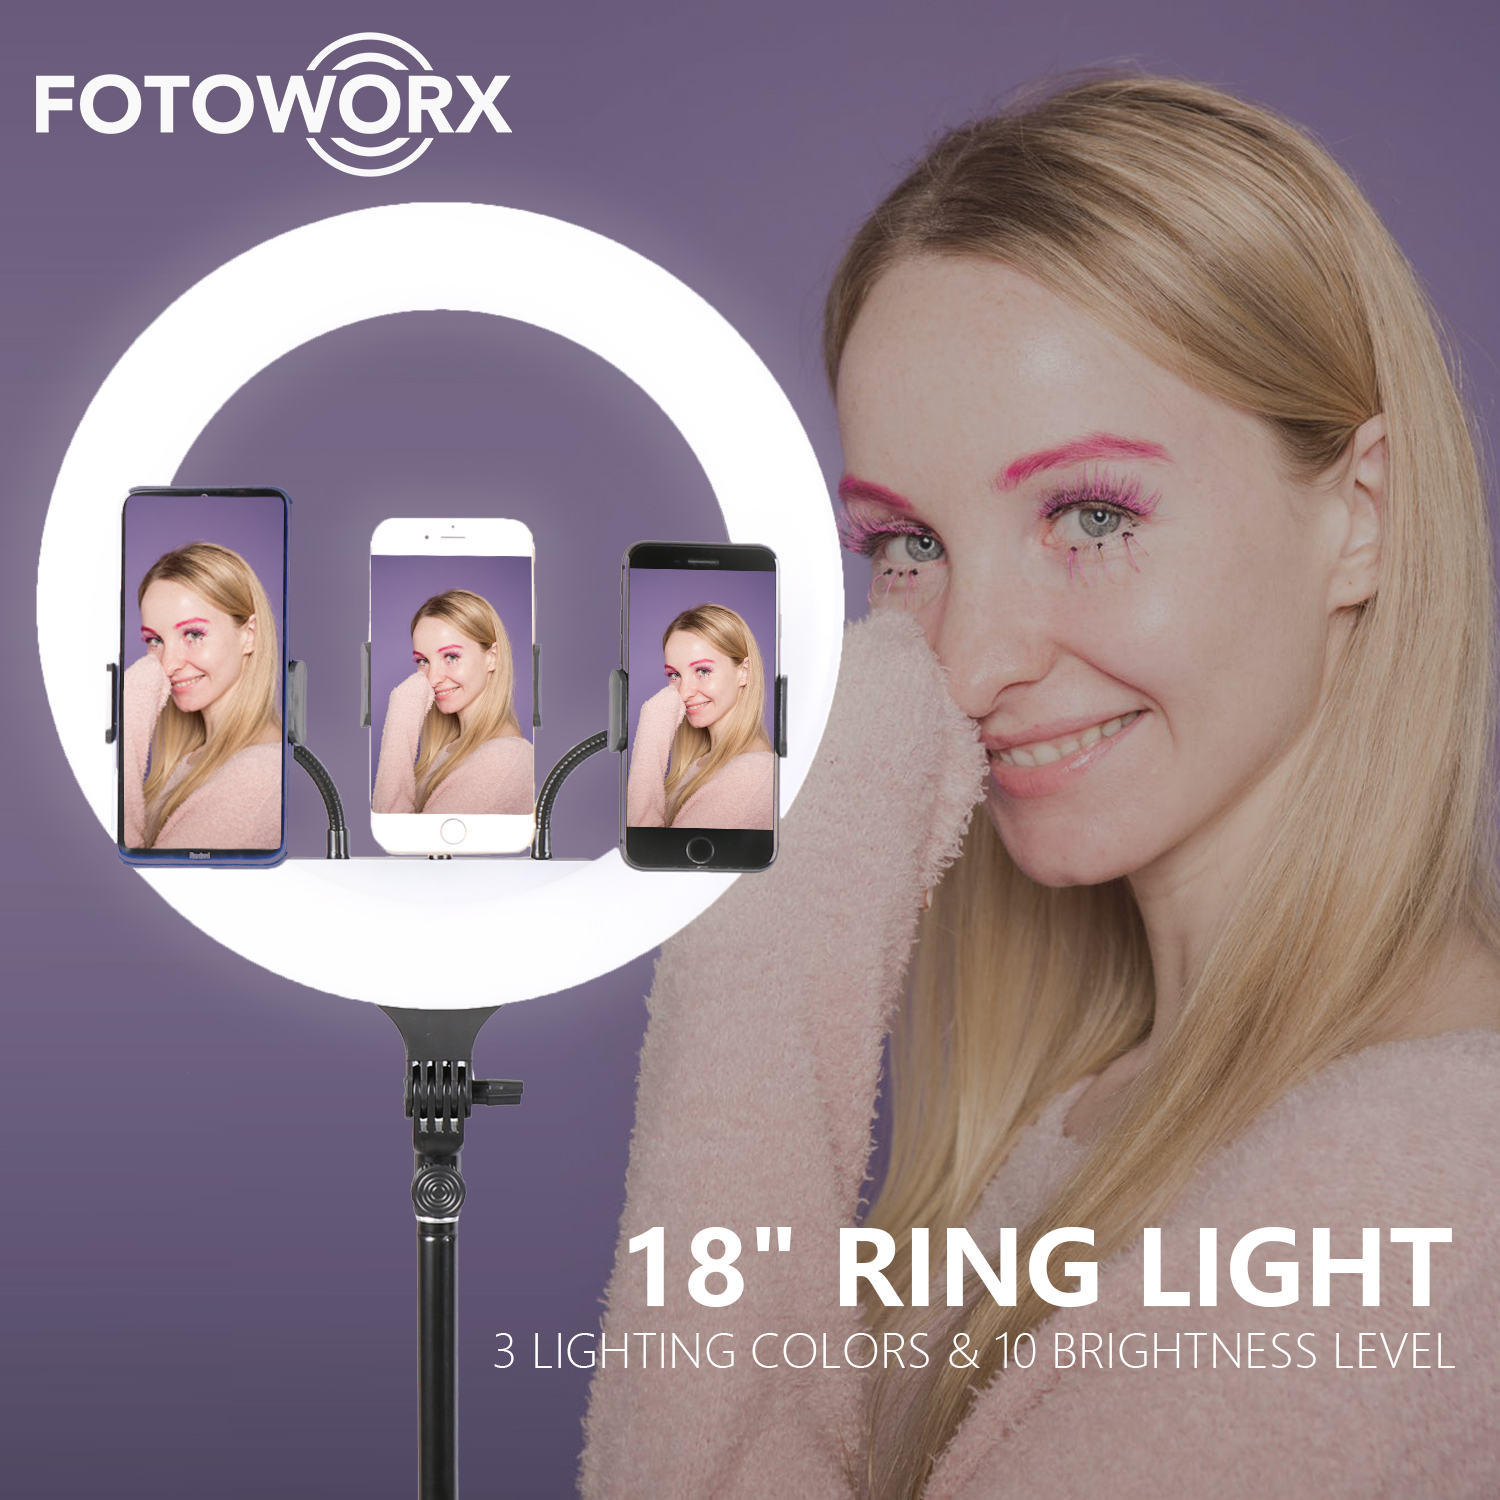 5 Tips for using ring lights in photography